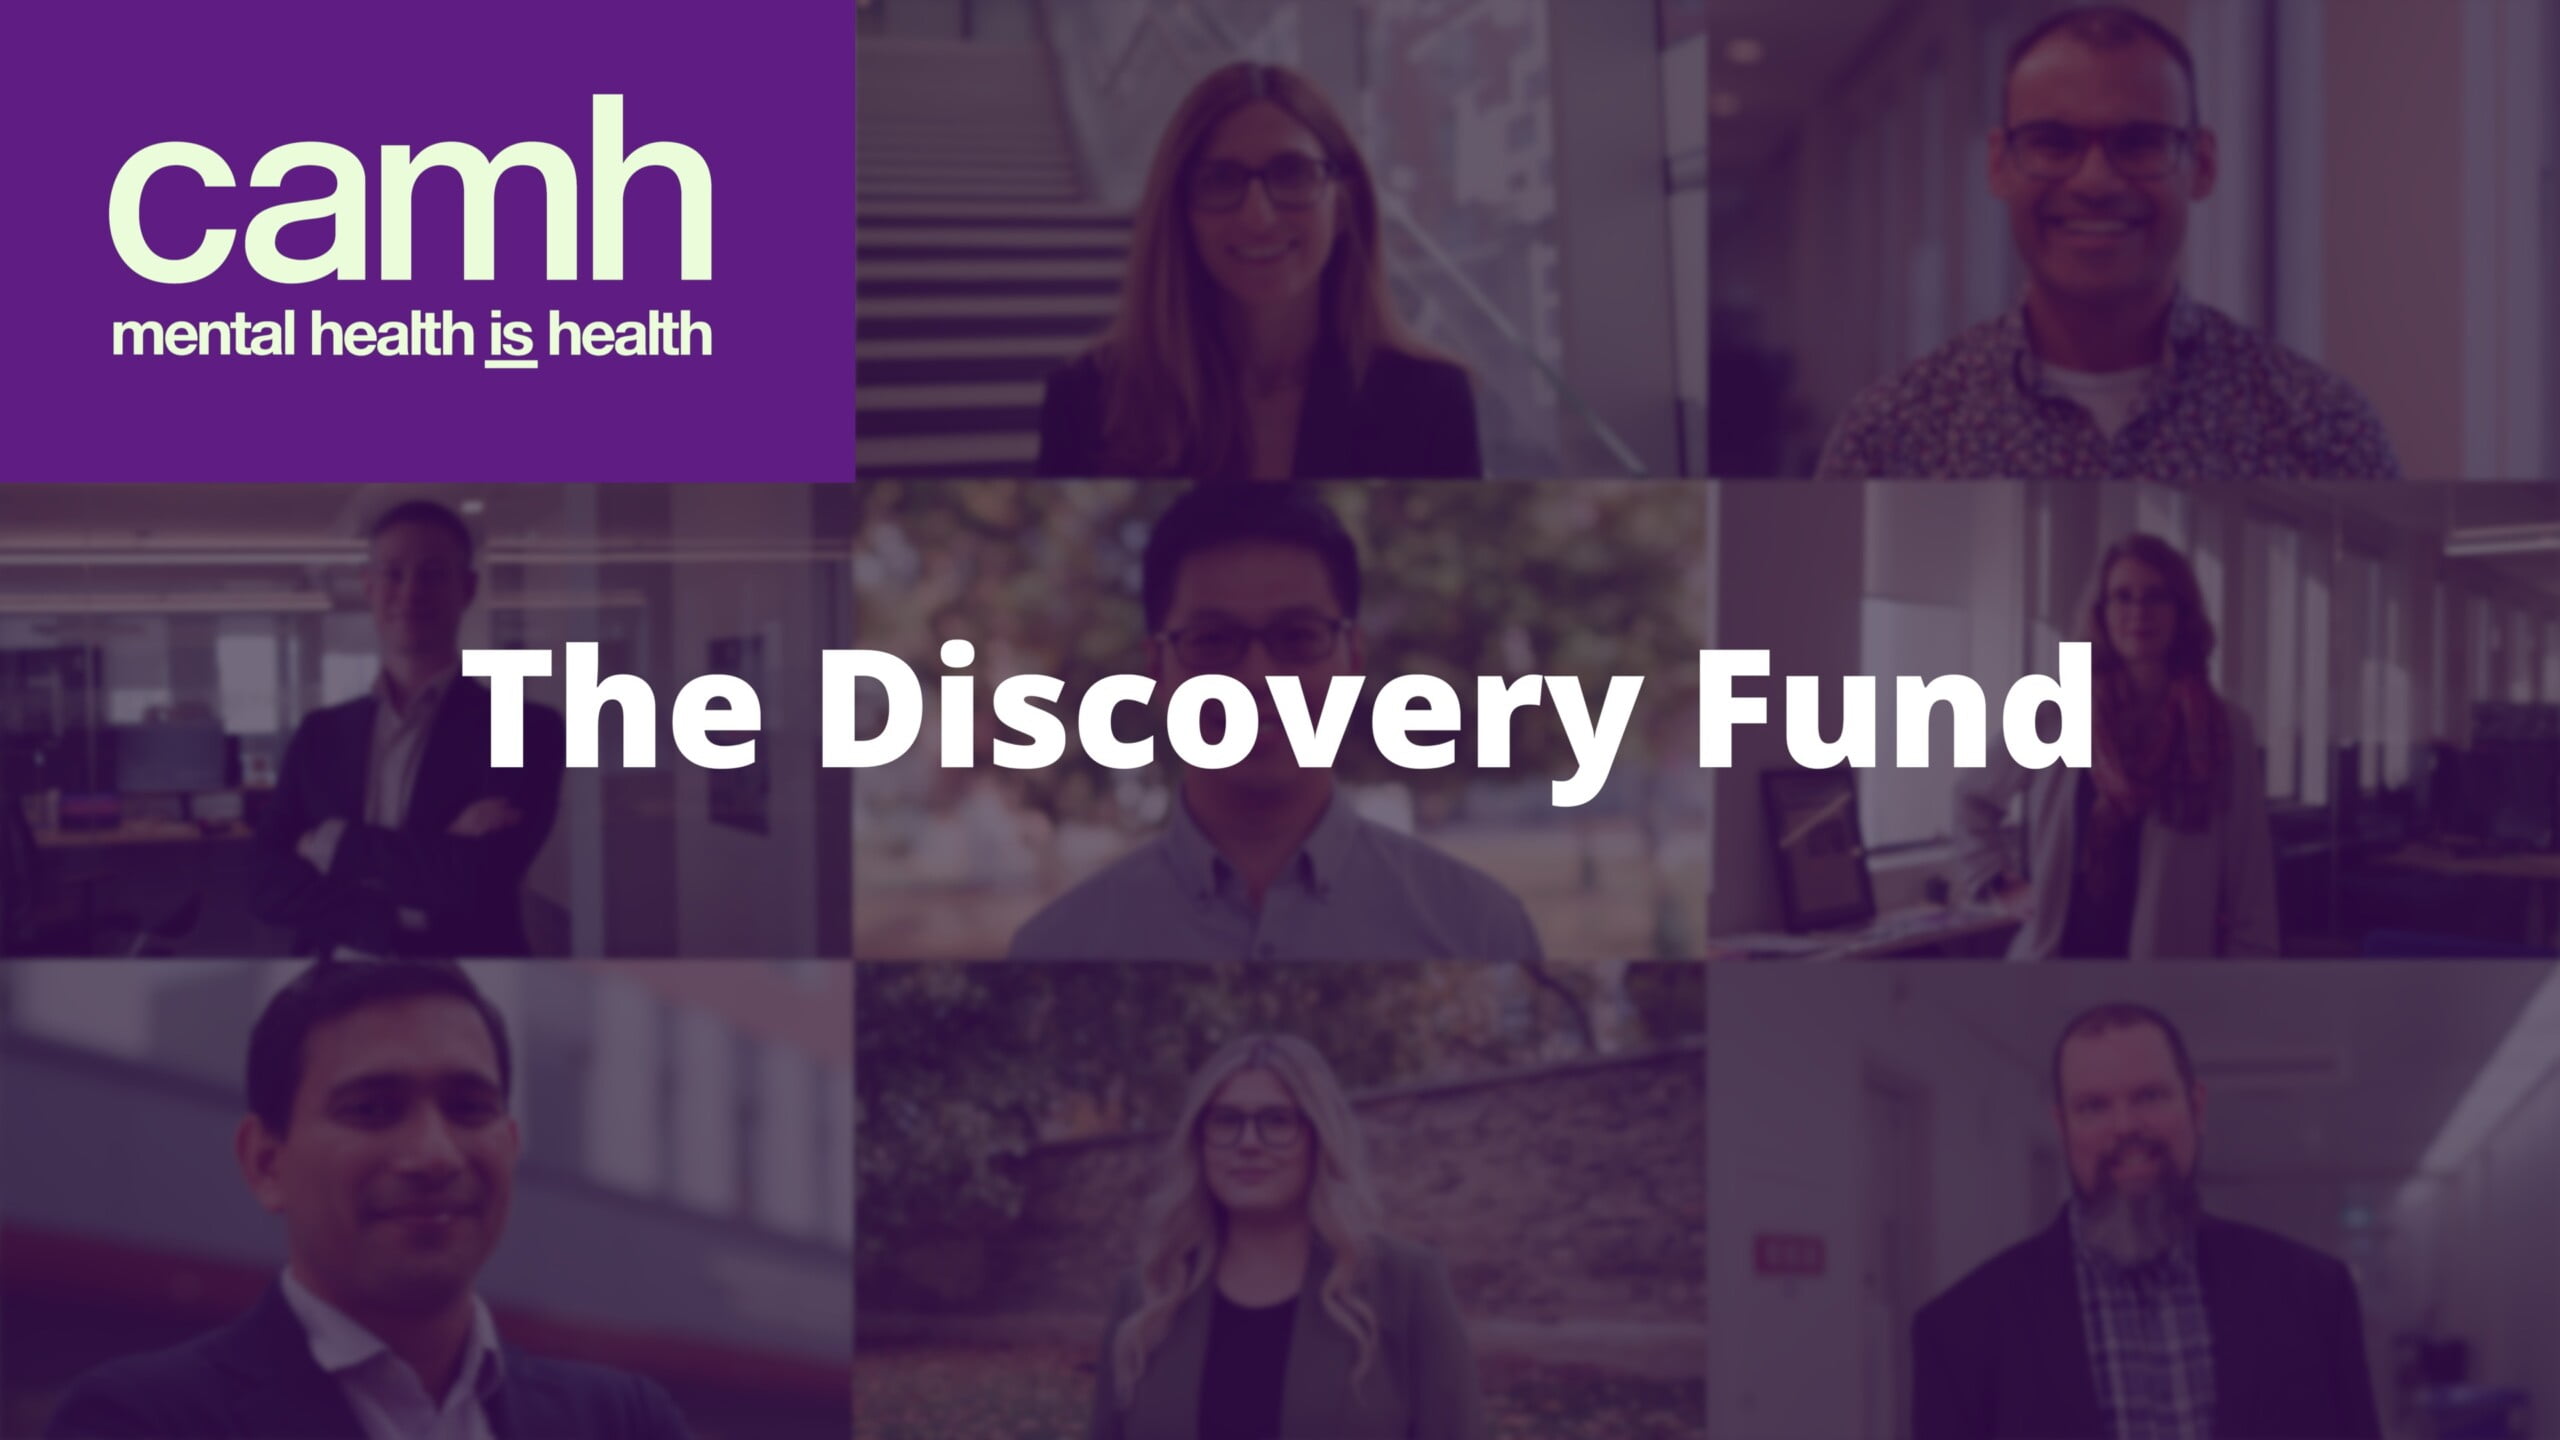 9 Scientists Talk about the Discovery Fund